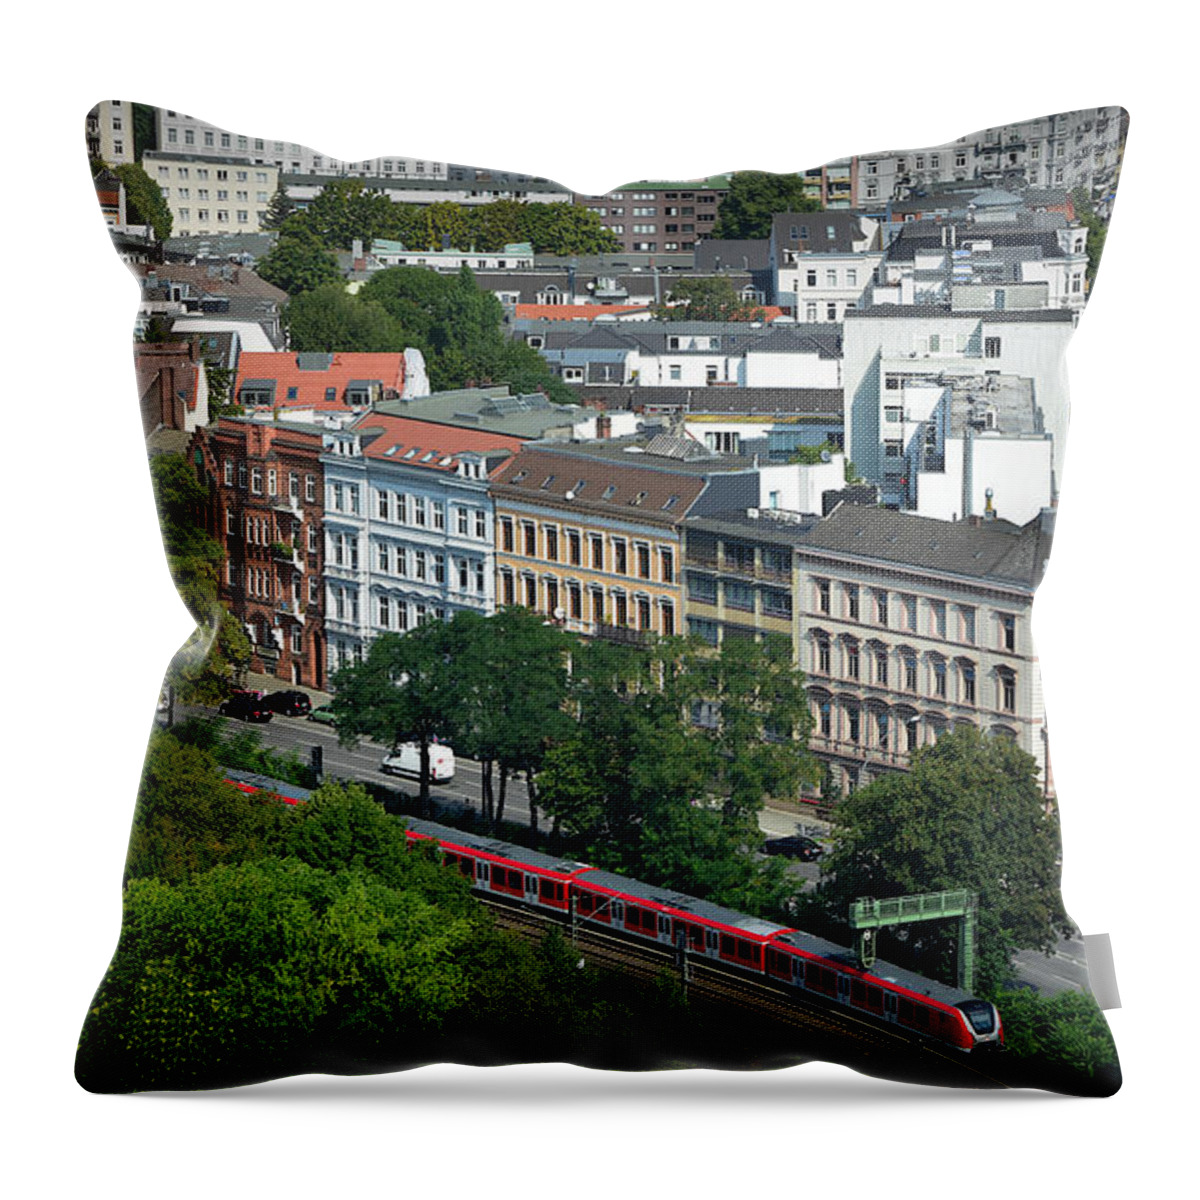 Hamburg Throw Pillow featuring the photograph Grindelallee, Rotherbaum District by Yvonne Johnstone